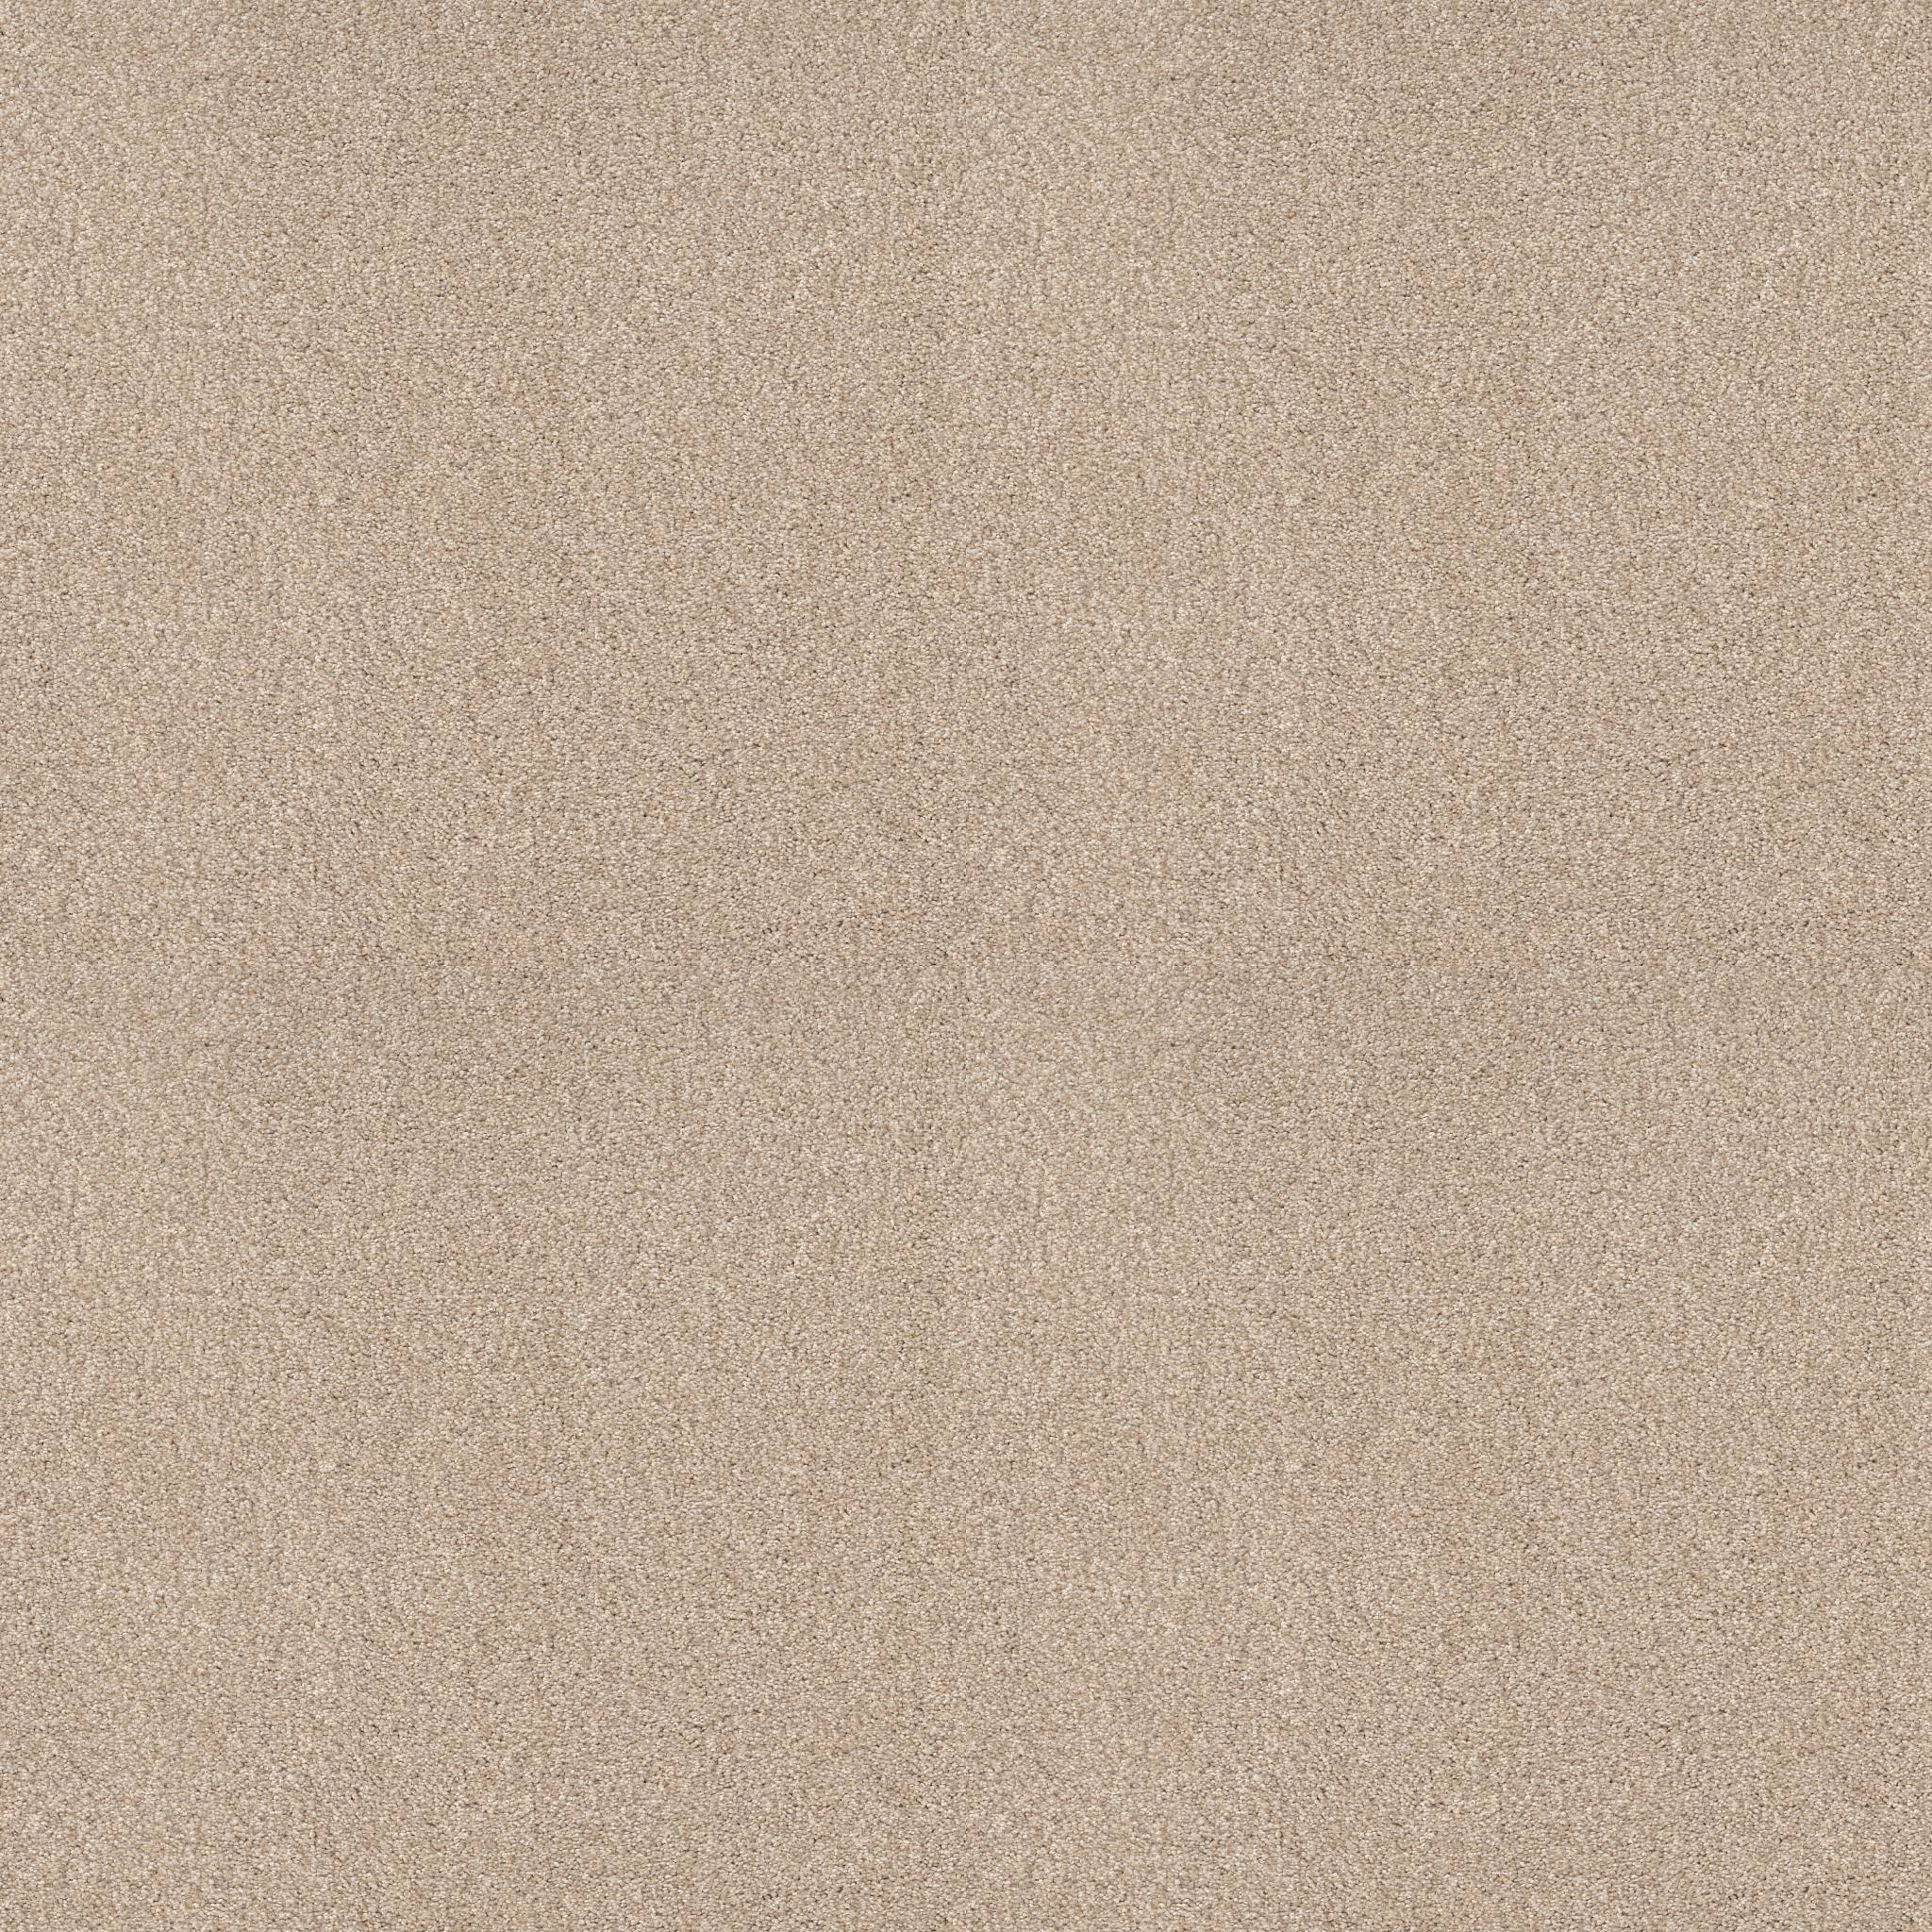 Grand Variety Carpet - Vintage Tan(T) Zoomed Swatch Image